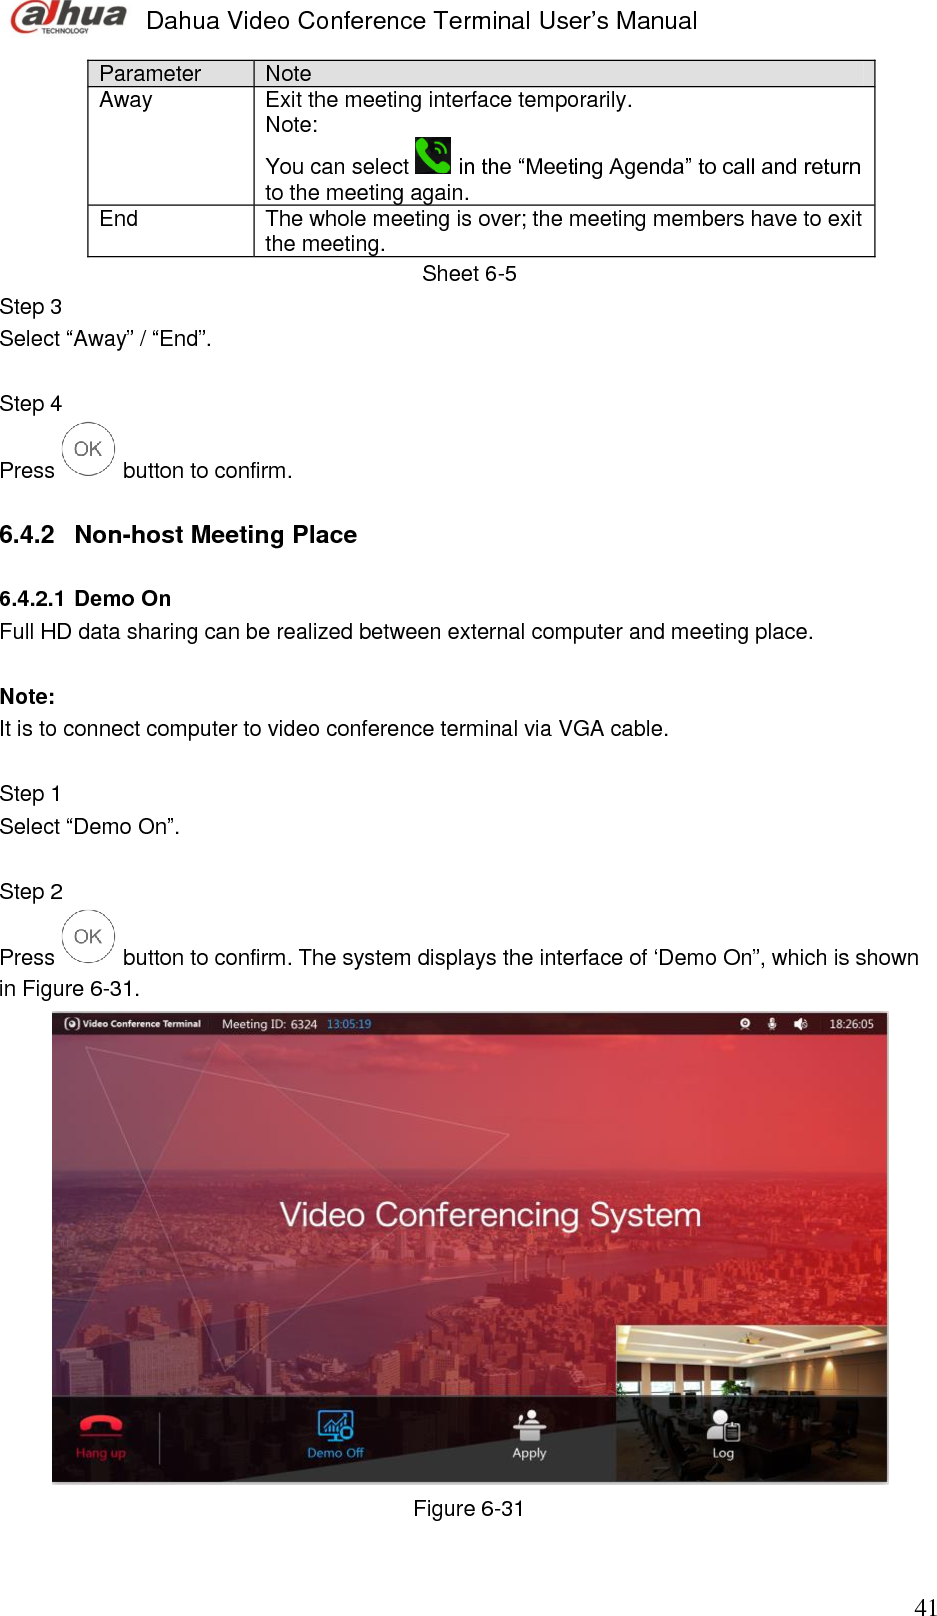  Dahua Video Conference Terminal User’s Manual                                                                              41 Parameter Note Away Exit the meeting interface temporarily.  Note:  You can select   in the “Meeting Agenda” to call and return to the meeting again.  End The whole meeting is over; the meeting members have to exit the meeting. Sheet 6-5 Step 3  Select “Away” / “End”.  Step 4  Press   button to confirm.   6.4.2  Non-host Meeting Place  6.4.2.1 Demo On  Full HD data sharing can be realized between external computer and meeting place.   Note:  It is to connect computer to video conference terminal via VGA cable.   Step 1  Select “Demo On”.  Step 2  Press   button to confirm. The system displays the interface of ‘Demo On”, which is shown in Figure 6-31.   Figure 6-31 